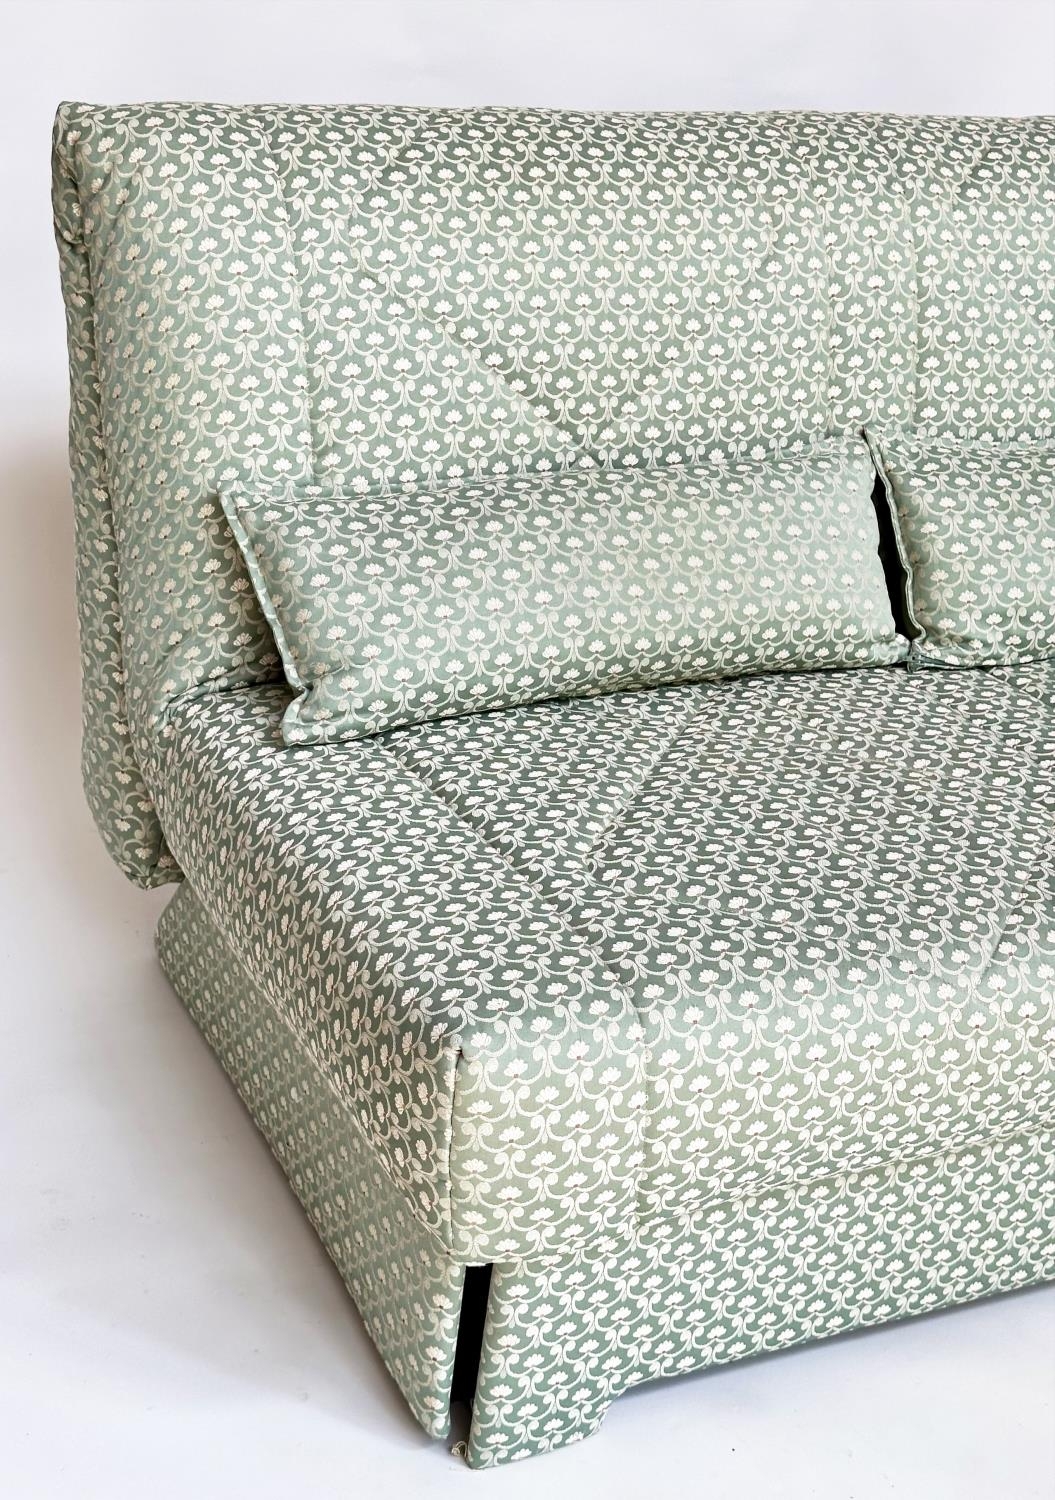 SOFA BED, geometric print upholstered with cushion, transferring to bed, 142cm W (180cm extended). - Image 2 of 8